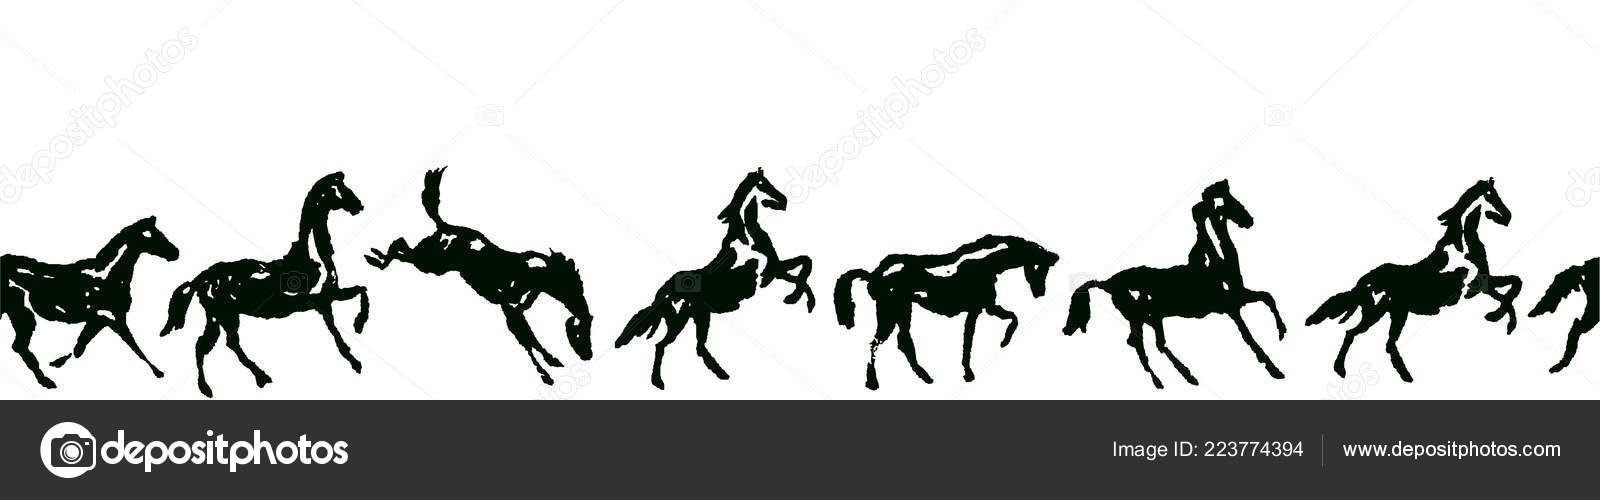 Equestrian Seamless Border Horse Silhouette Various Poses Motion Vector Pattern Vector Image By C Larisa Zorina Vector Stock